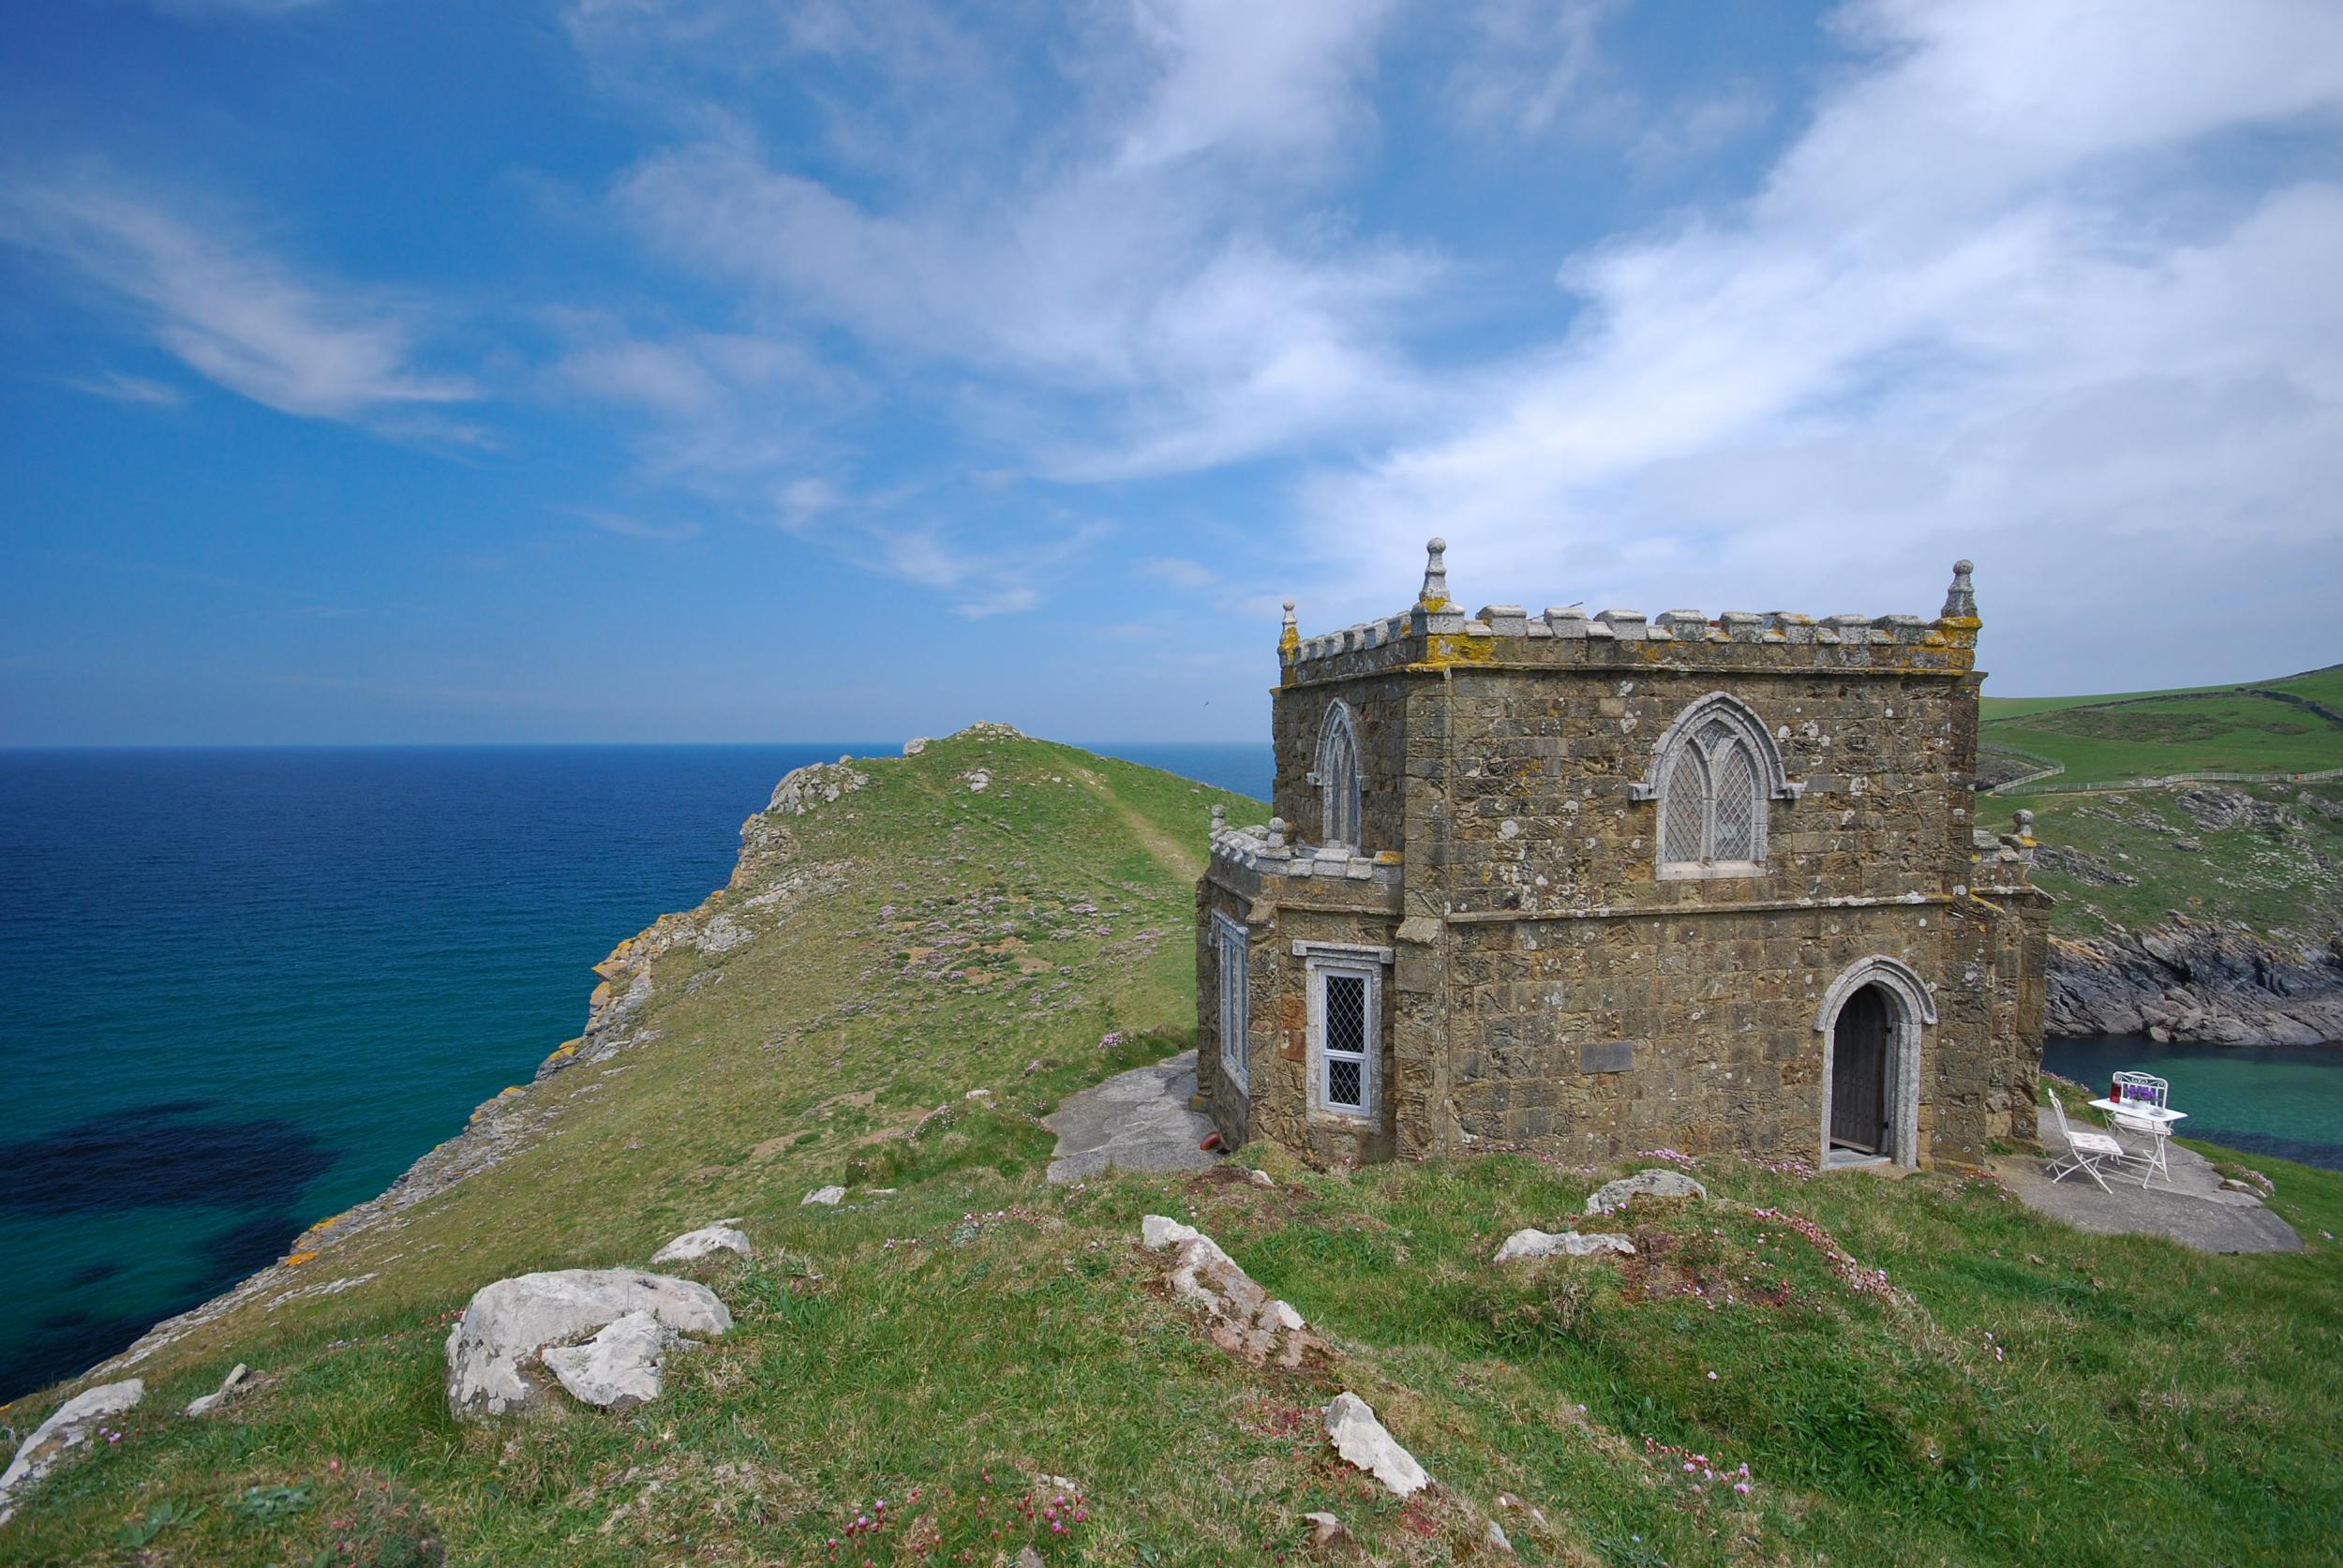 Doyden is perfectly positioned on Cornwall’s north coast (National Trust/Mike Henton)